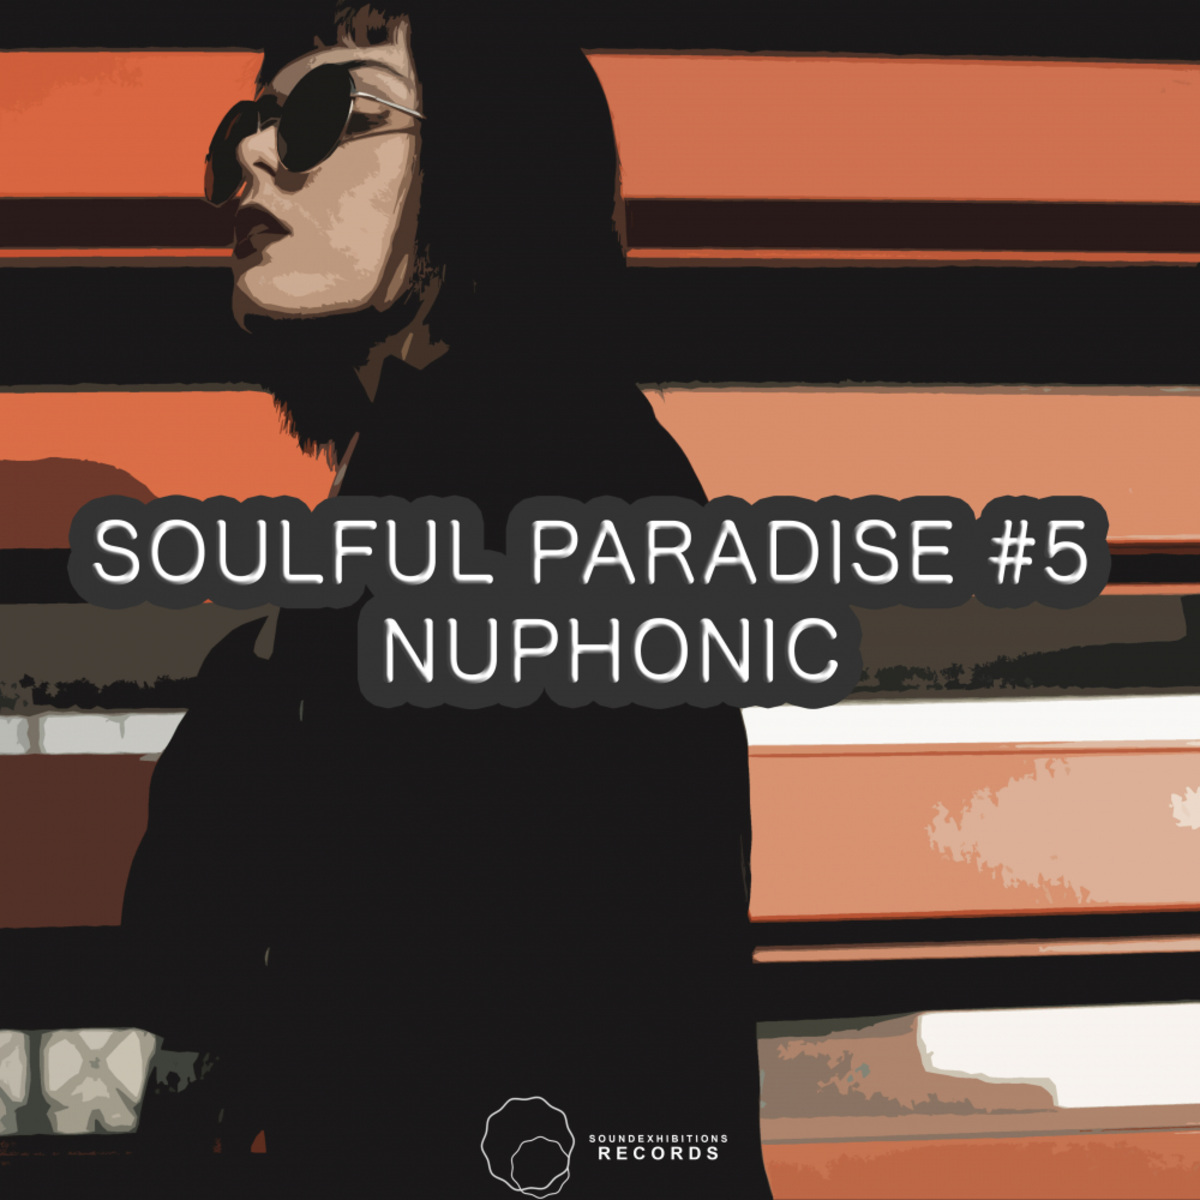 Nuphonic - Soulful Paradise #5 / Sound-Exhibitions-Records